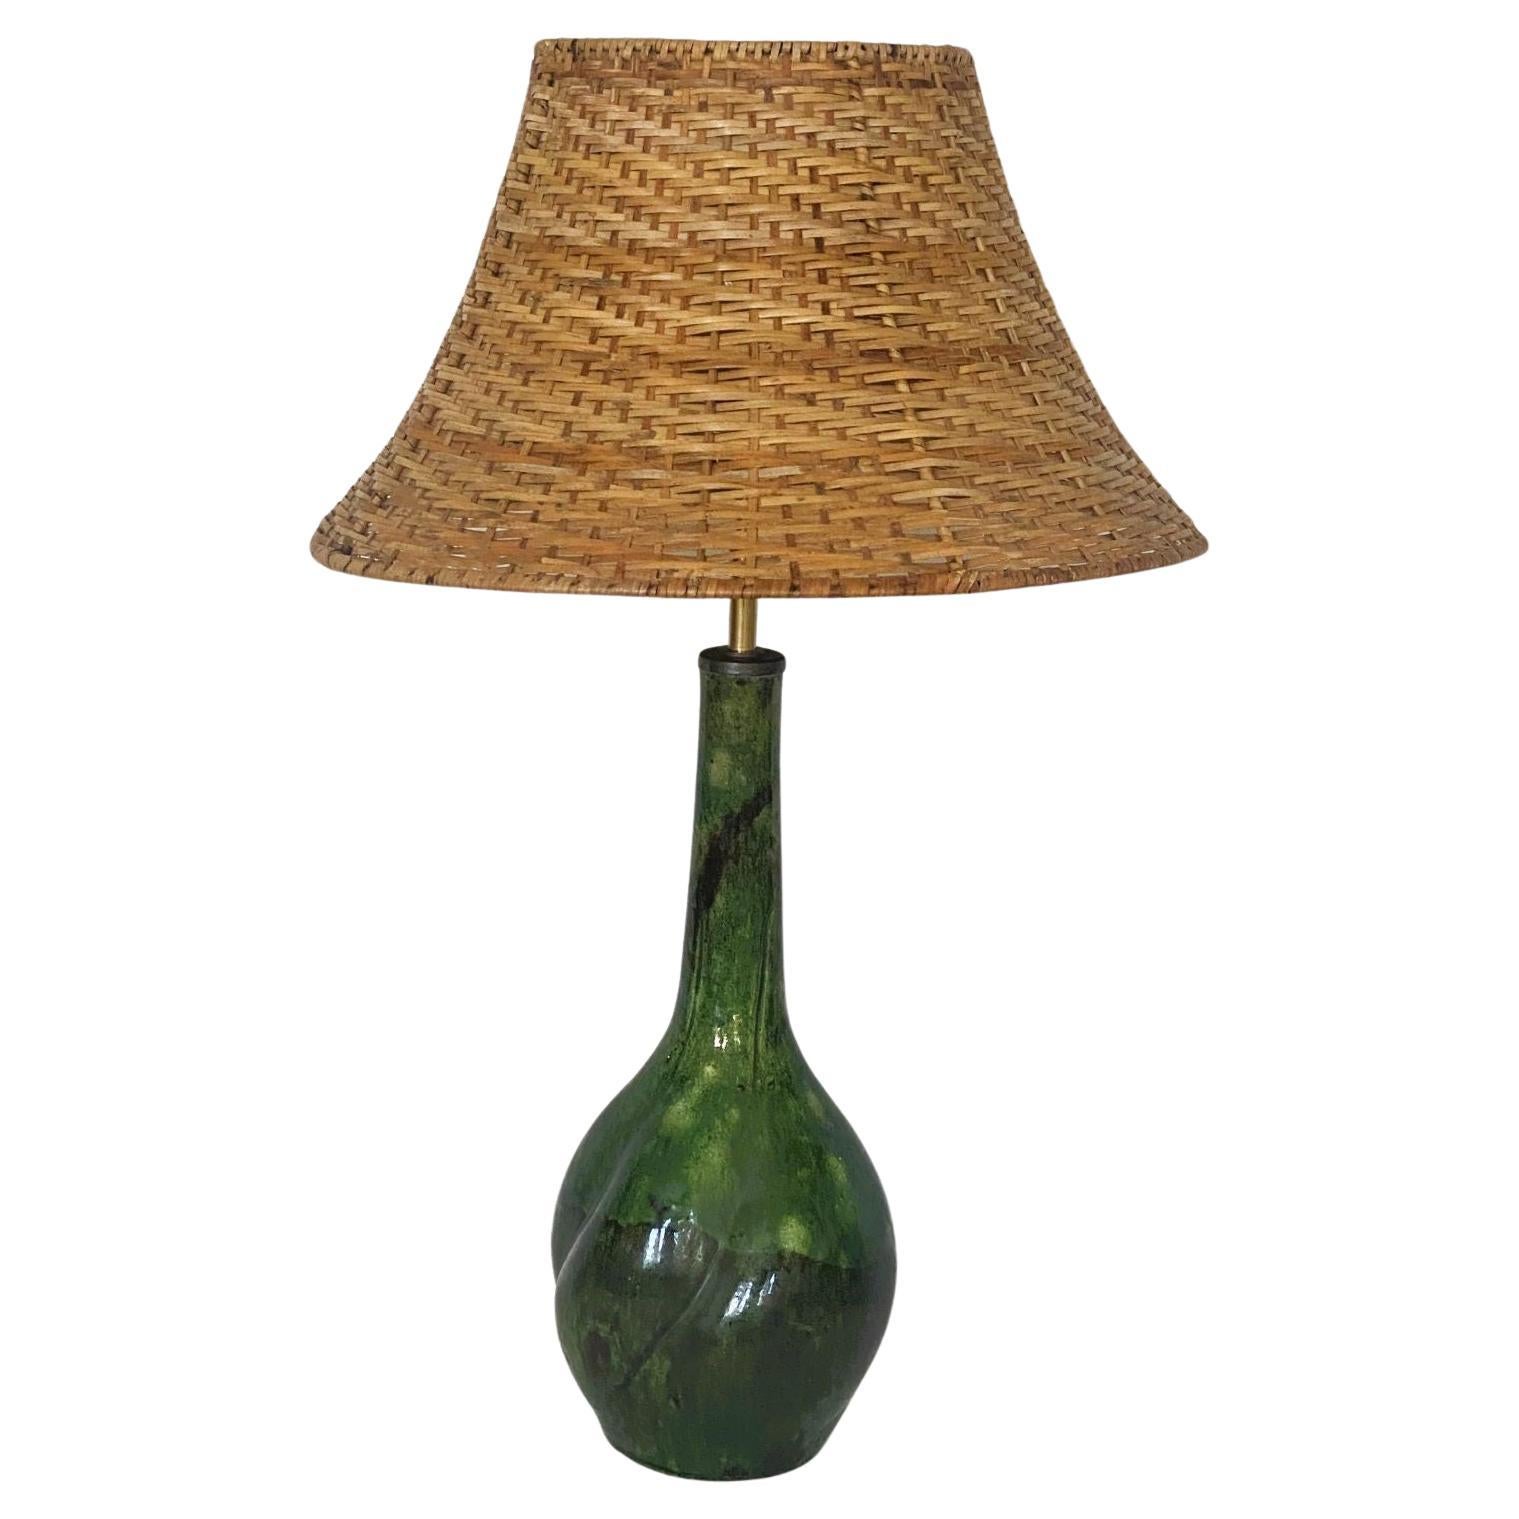 Danish Hand-Painted Glased Ceramic Table Lamp with Wicker Shade, 1960s For Sale